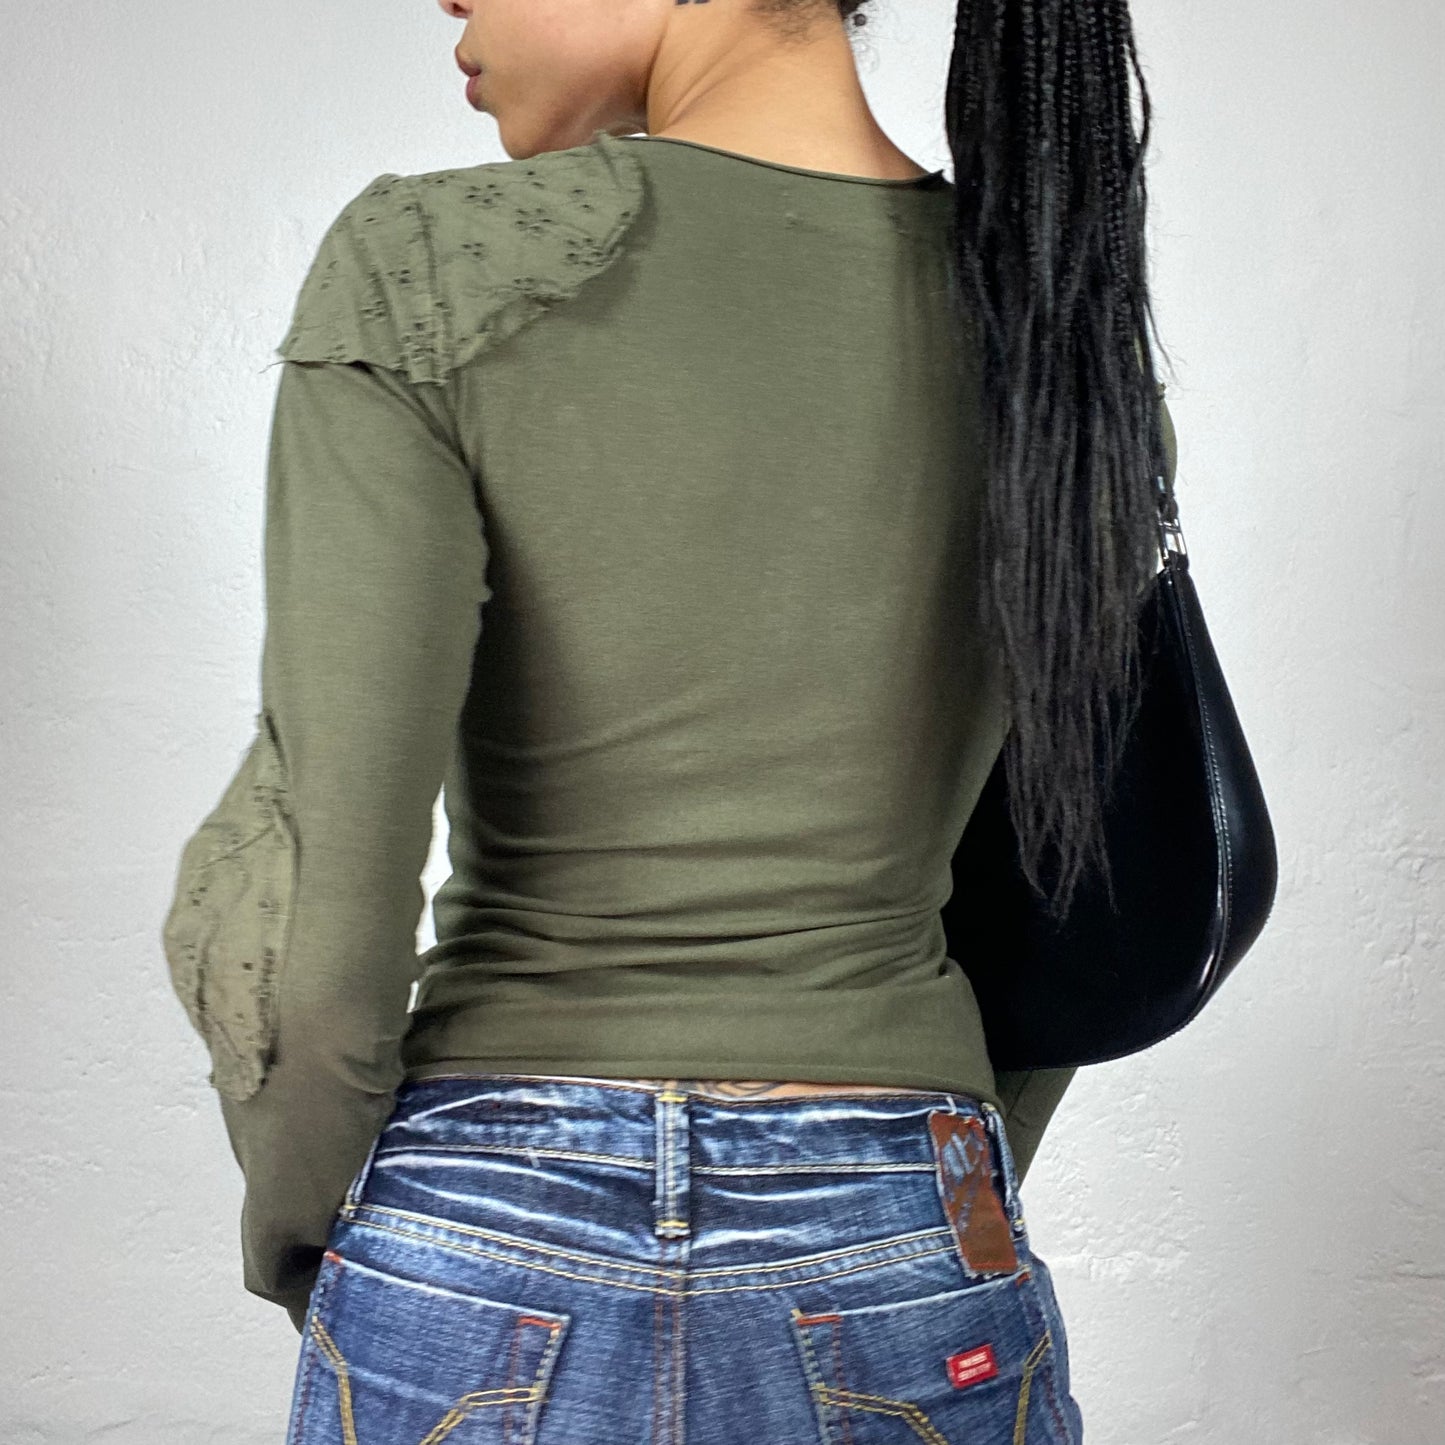 Vintage 2000's Downtown Girl Khaki Green Longsleeve Top with Patches and Sequin Embroidery (S)